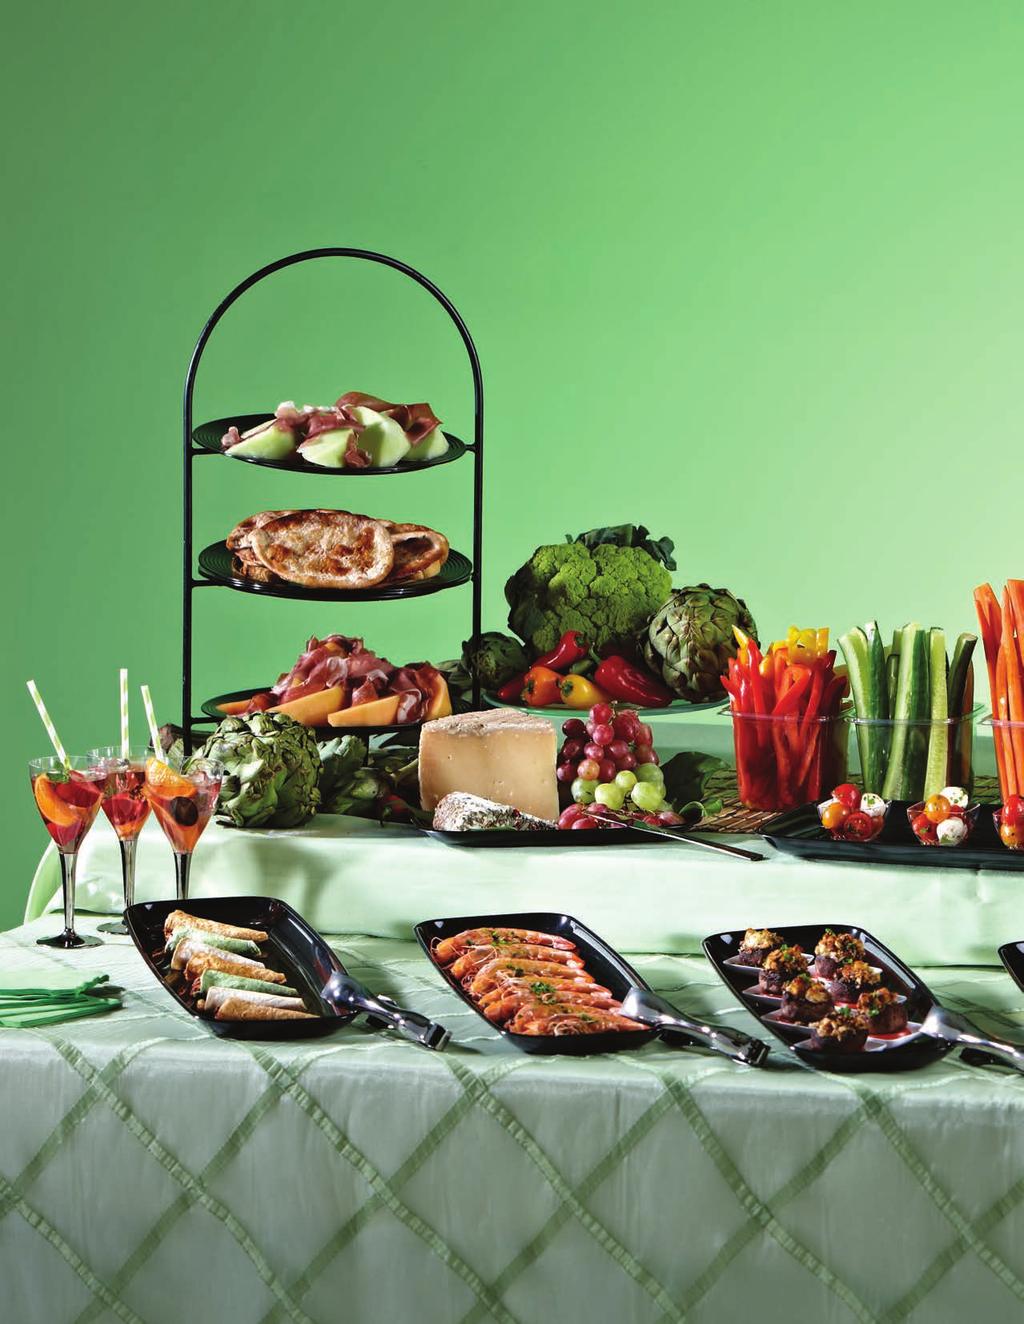 Cocktail Party Presentation is the first course and we have the disposable catering products you need to help you serve with style.